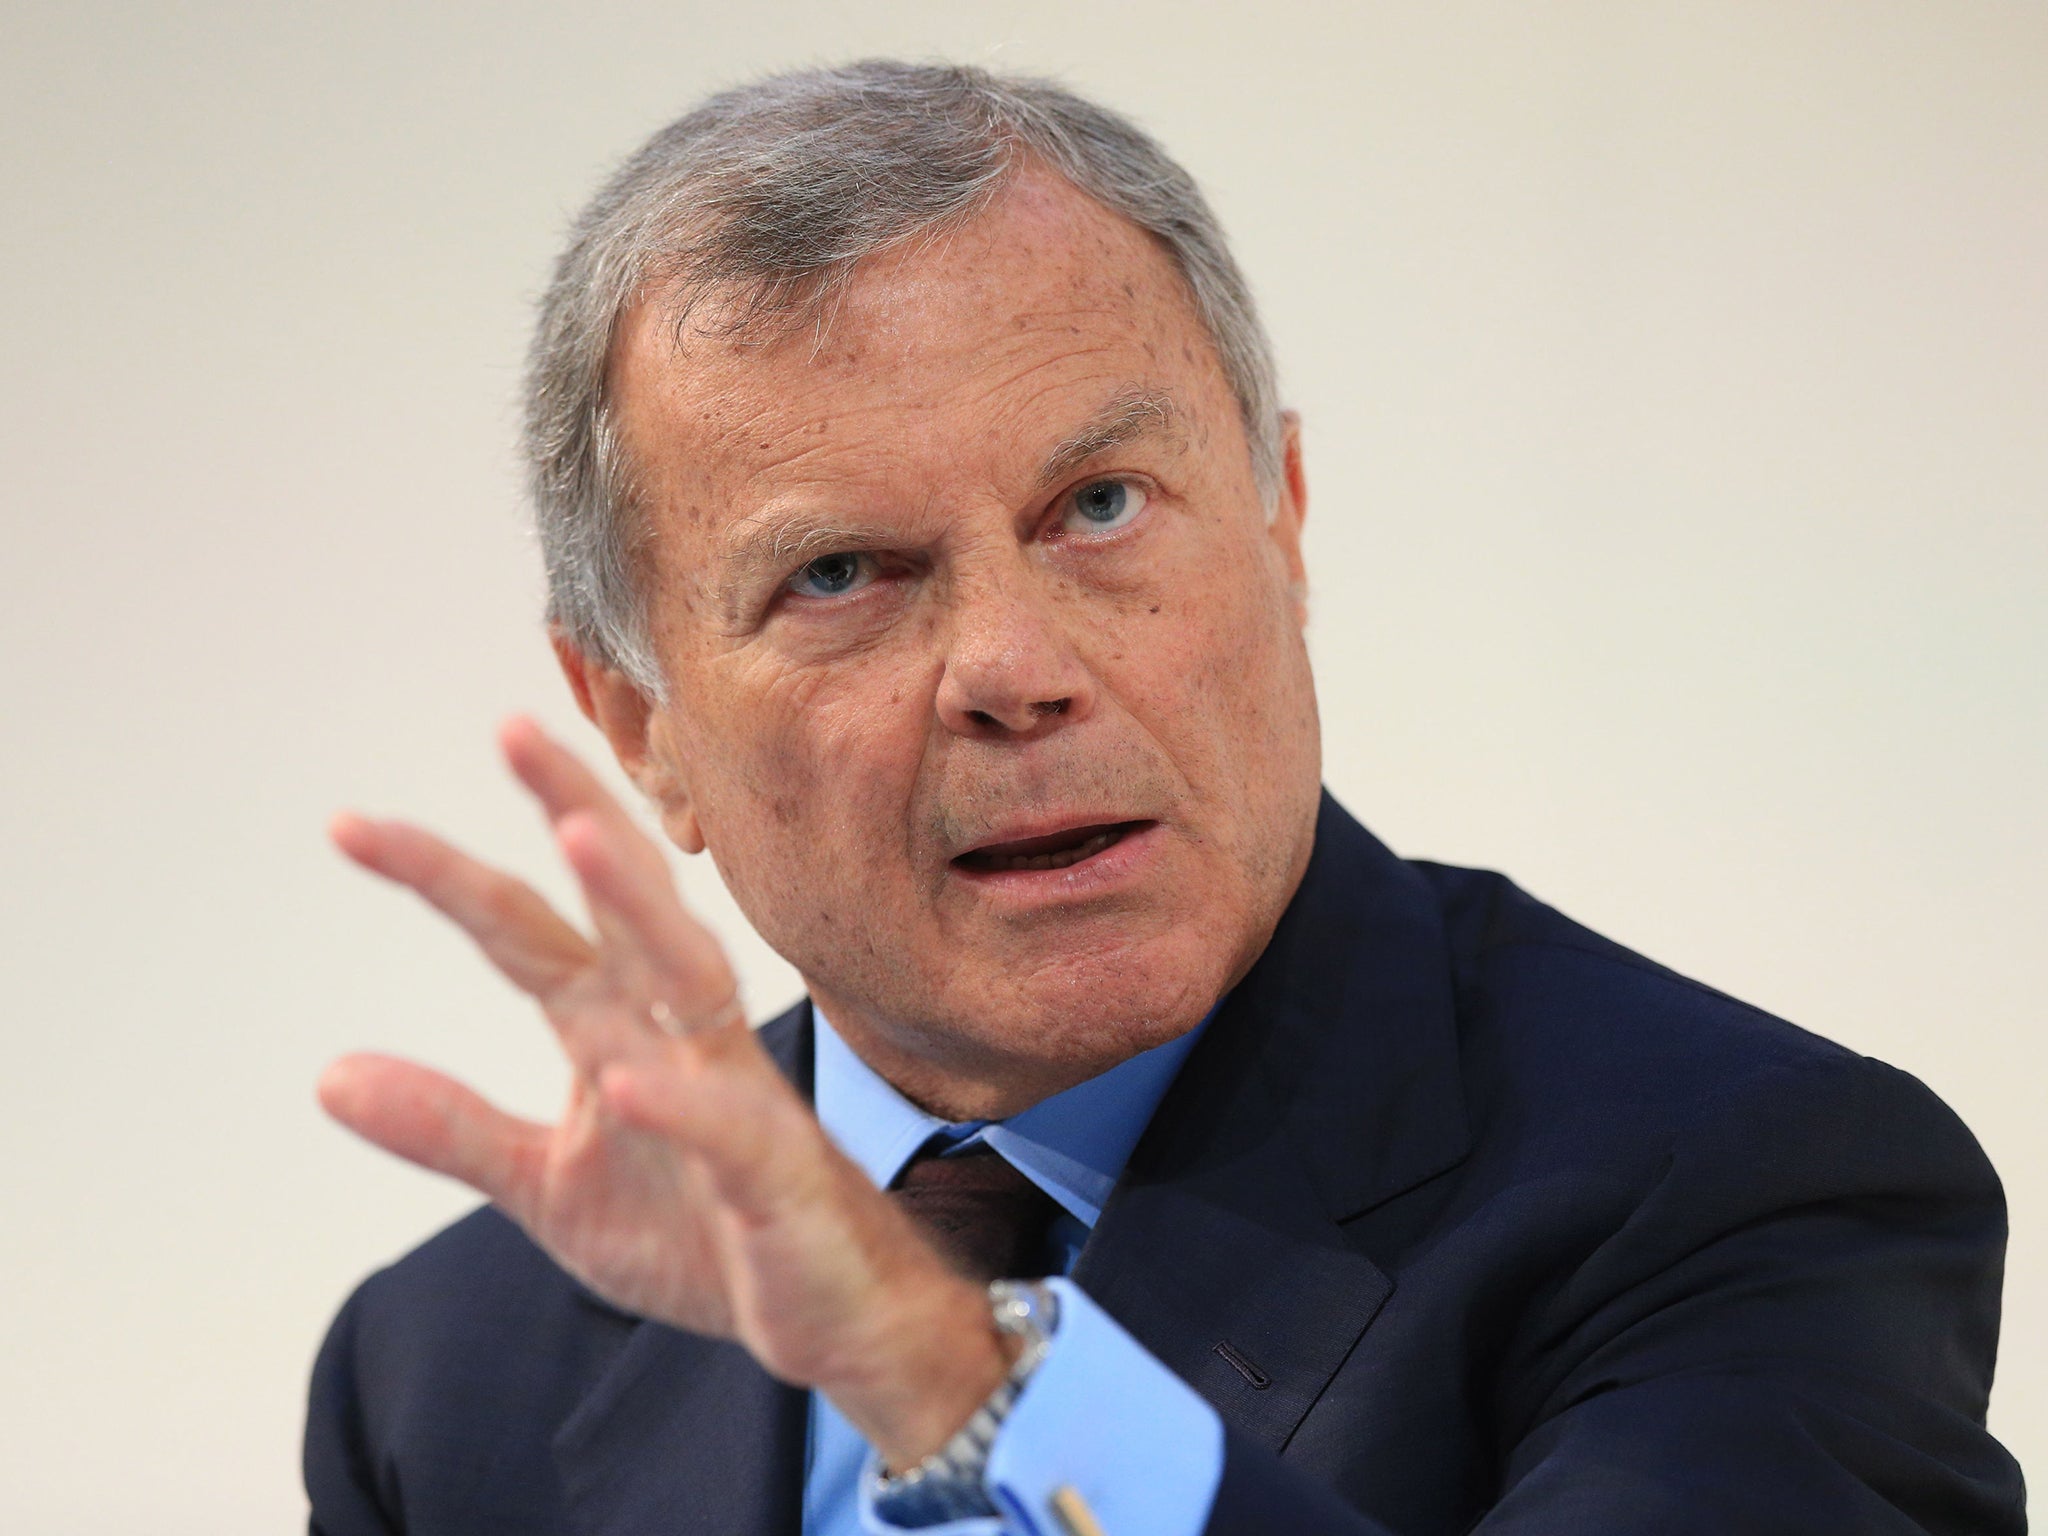 Sir Martin Sorrell joined WPP in 1985